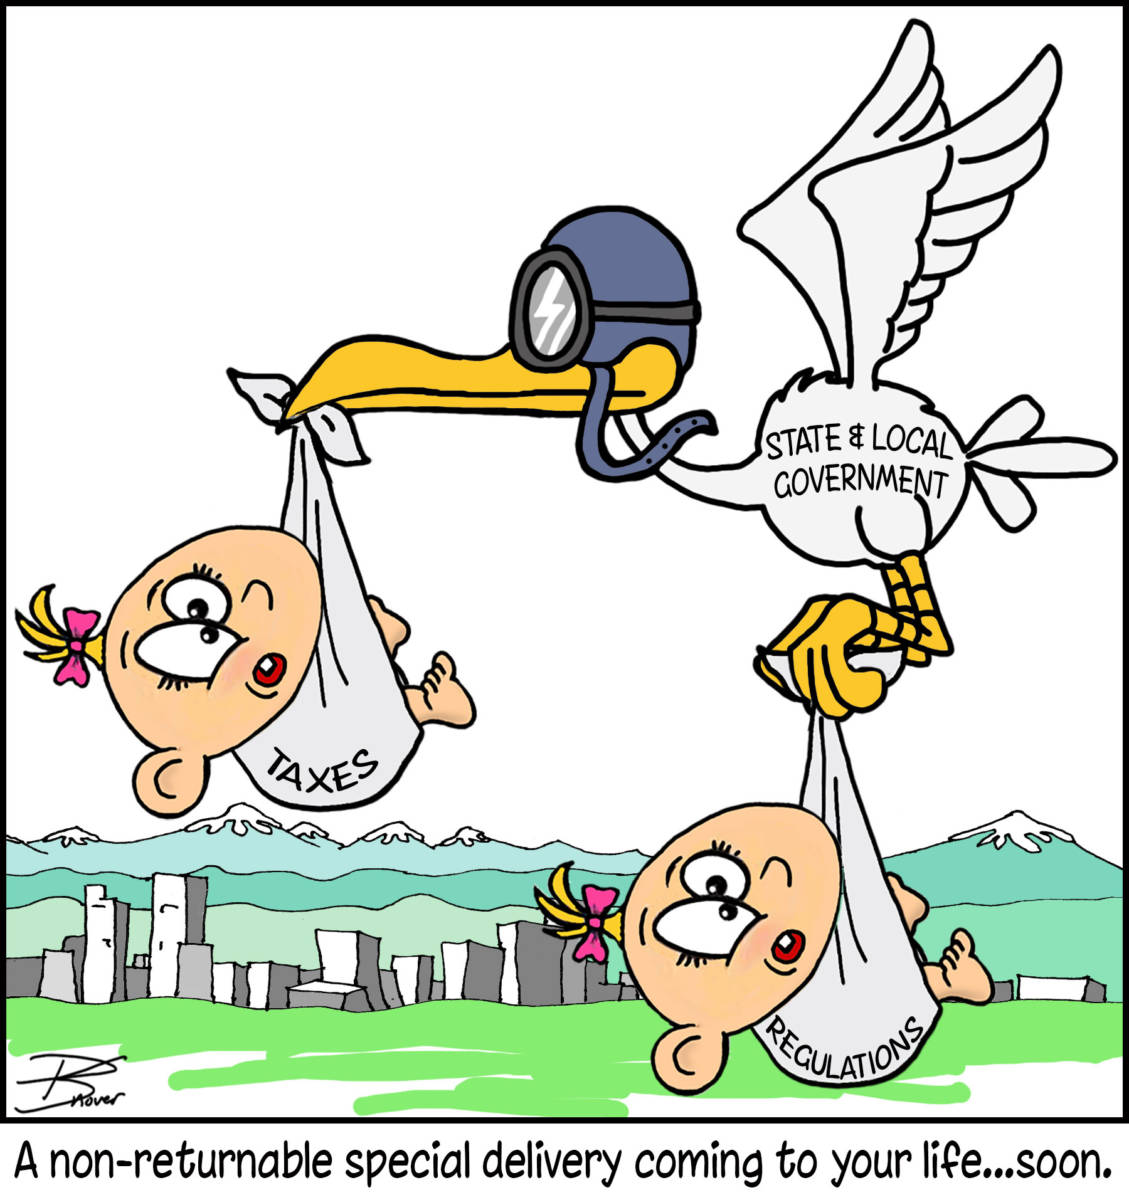 Cartoon: "Government Stork Twins" By Paul Snover, Skroder Comics